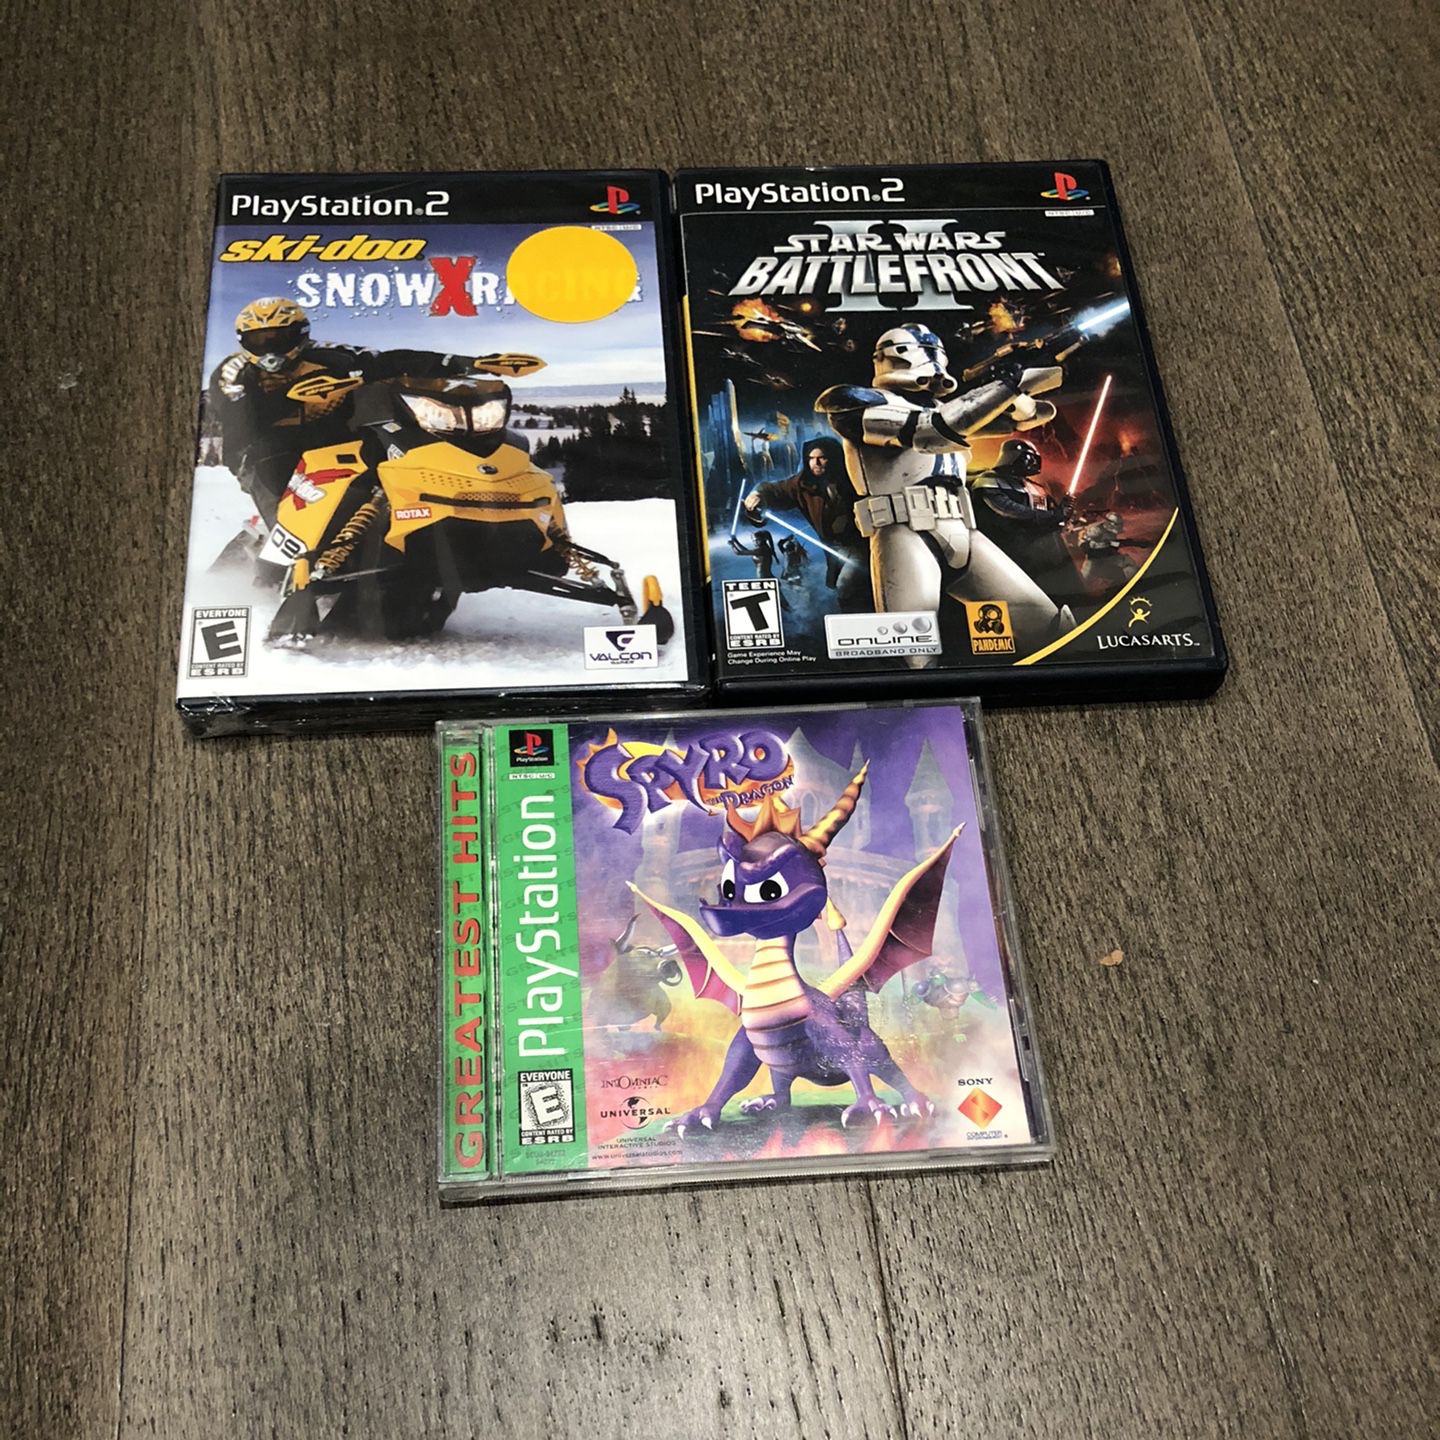 PS2 And PS1 Games